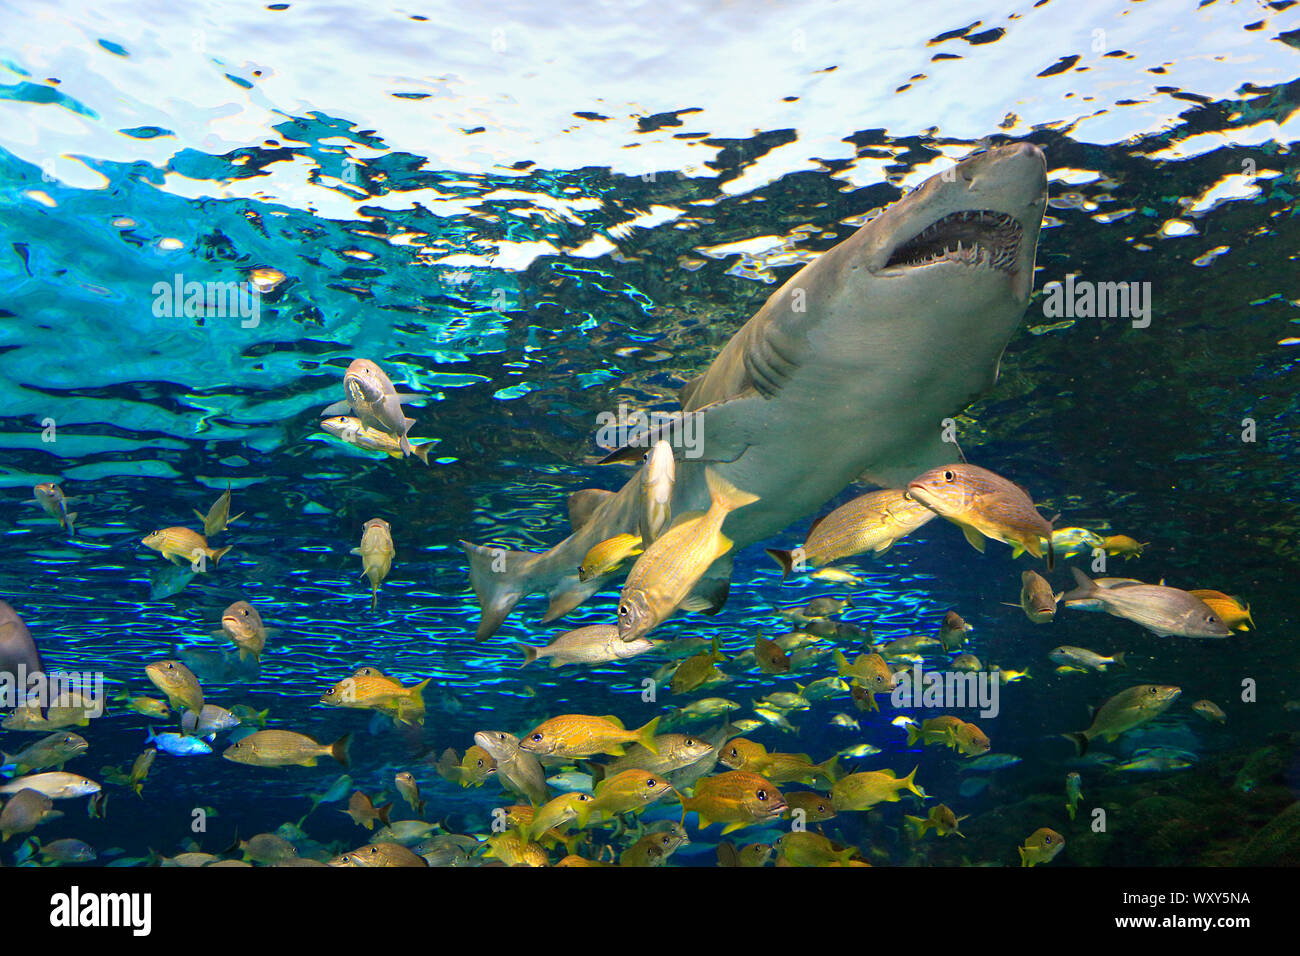 Dangerous shark swimming into the coral reef, surrounded by yellow fish Stock Photo